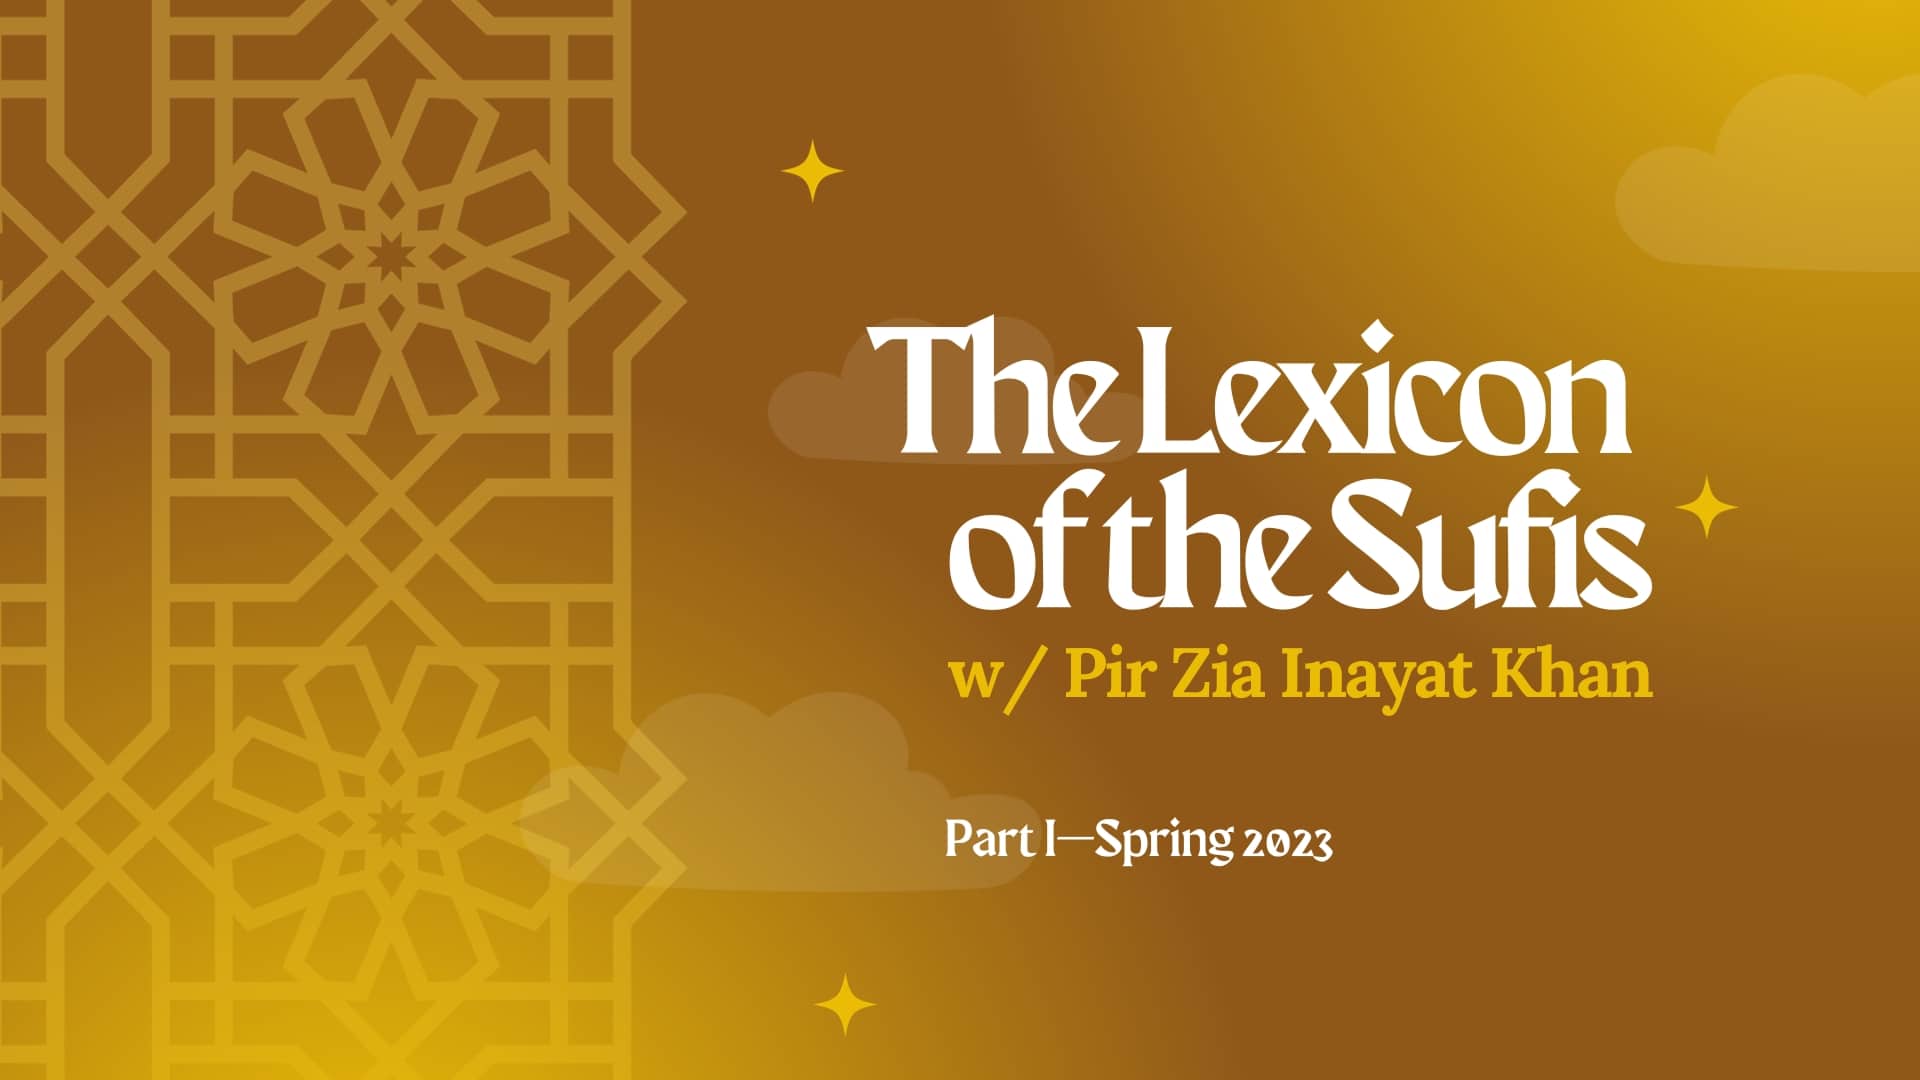 The Lexicon of the Sufis w/ Pir Zia Inayat Khan Part I, Spring 2023